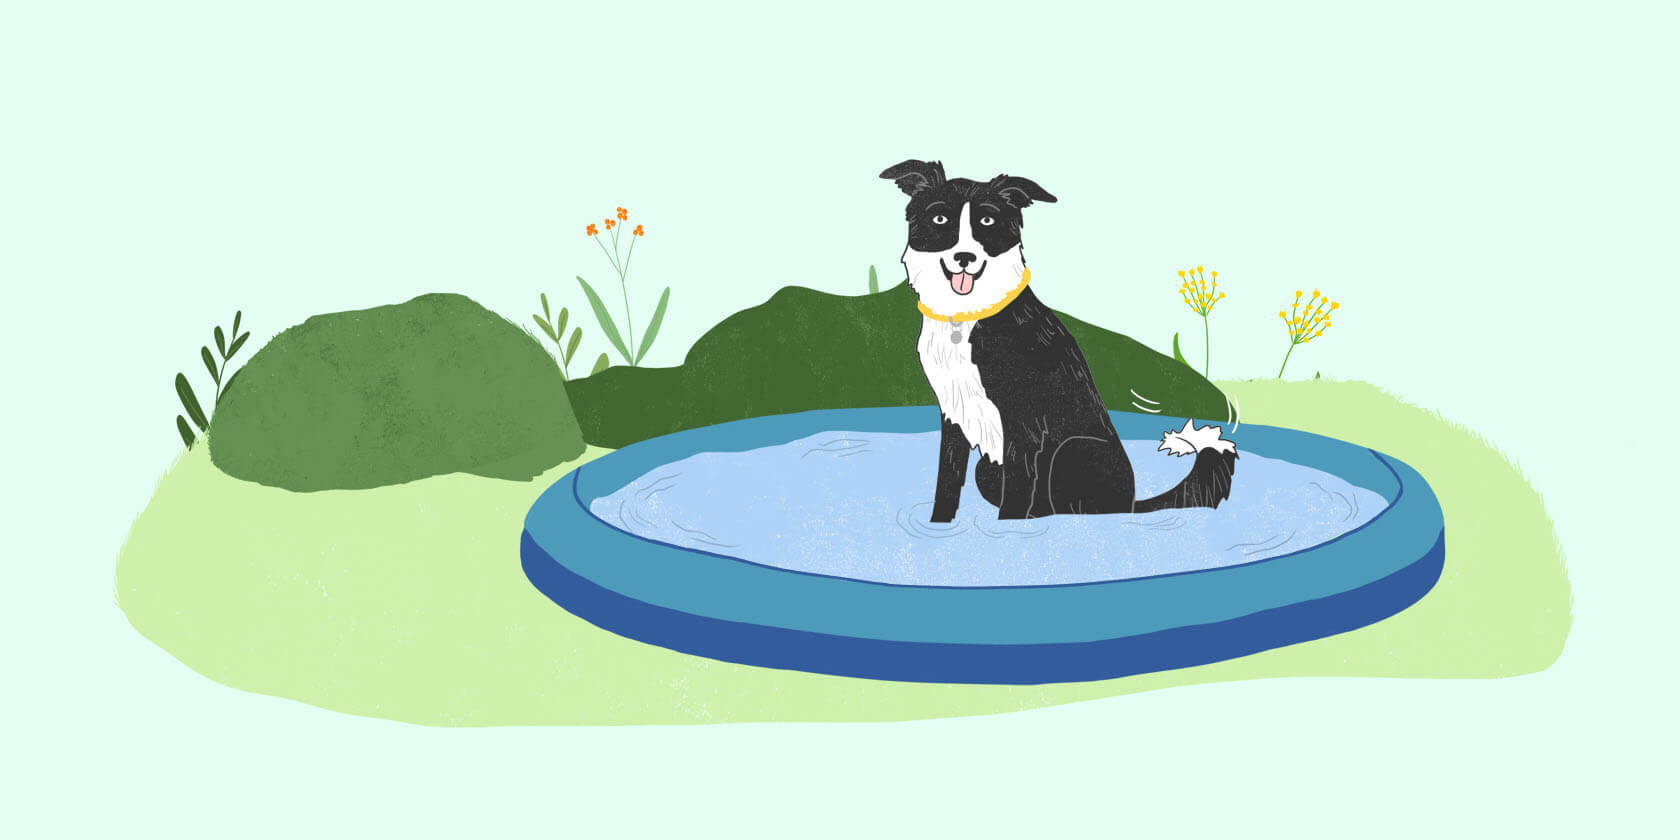 Illustrated dog sitting in a kiddie pool.